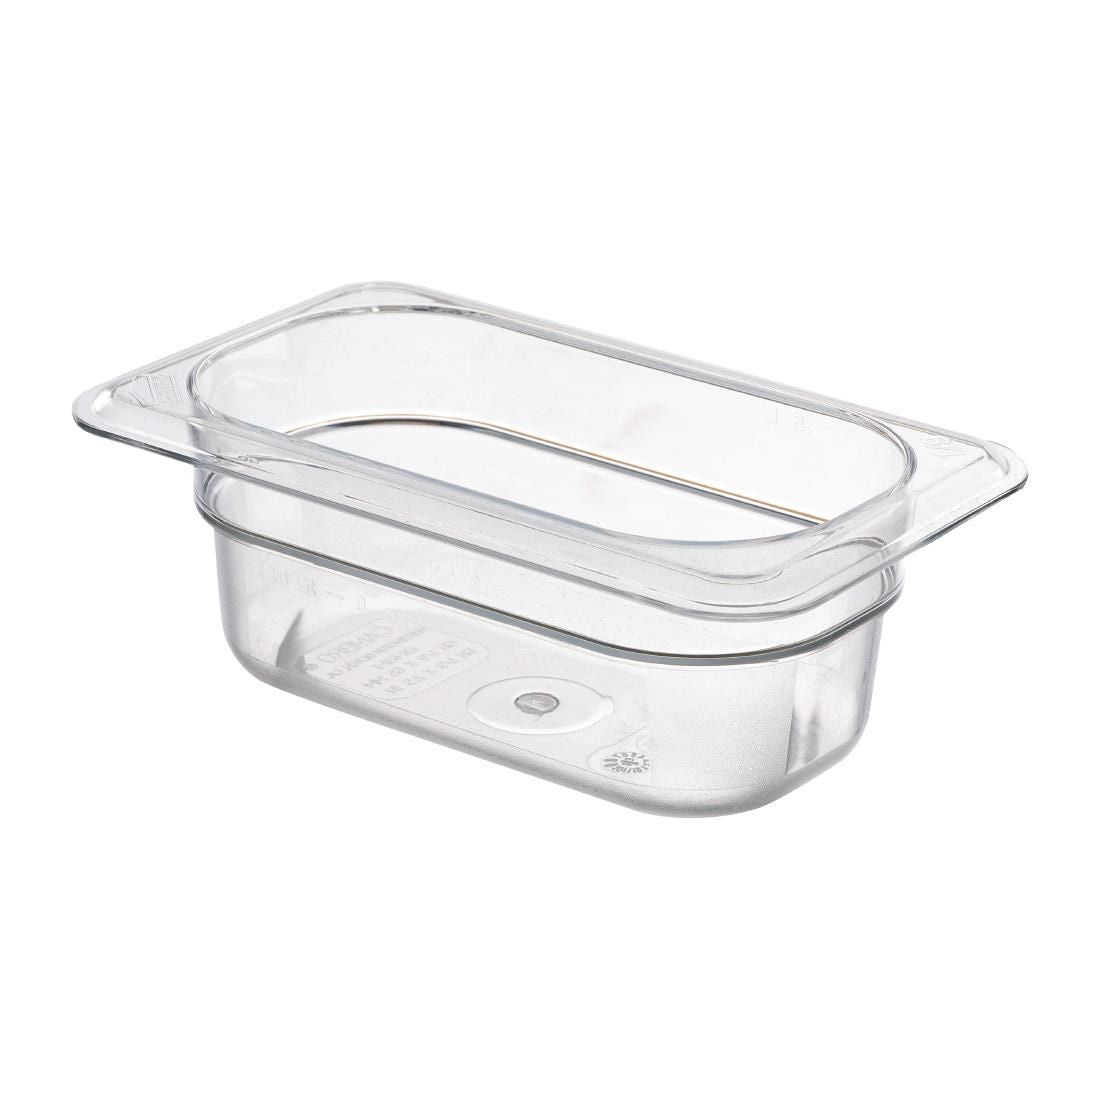 DM759 Cambro Polycarbonate 1/9 Gastronorm Pan 65mm JD Catering Equipment Solutions Ltd